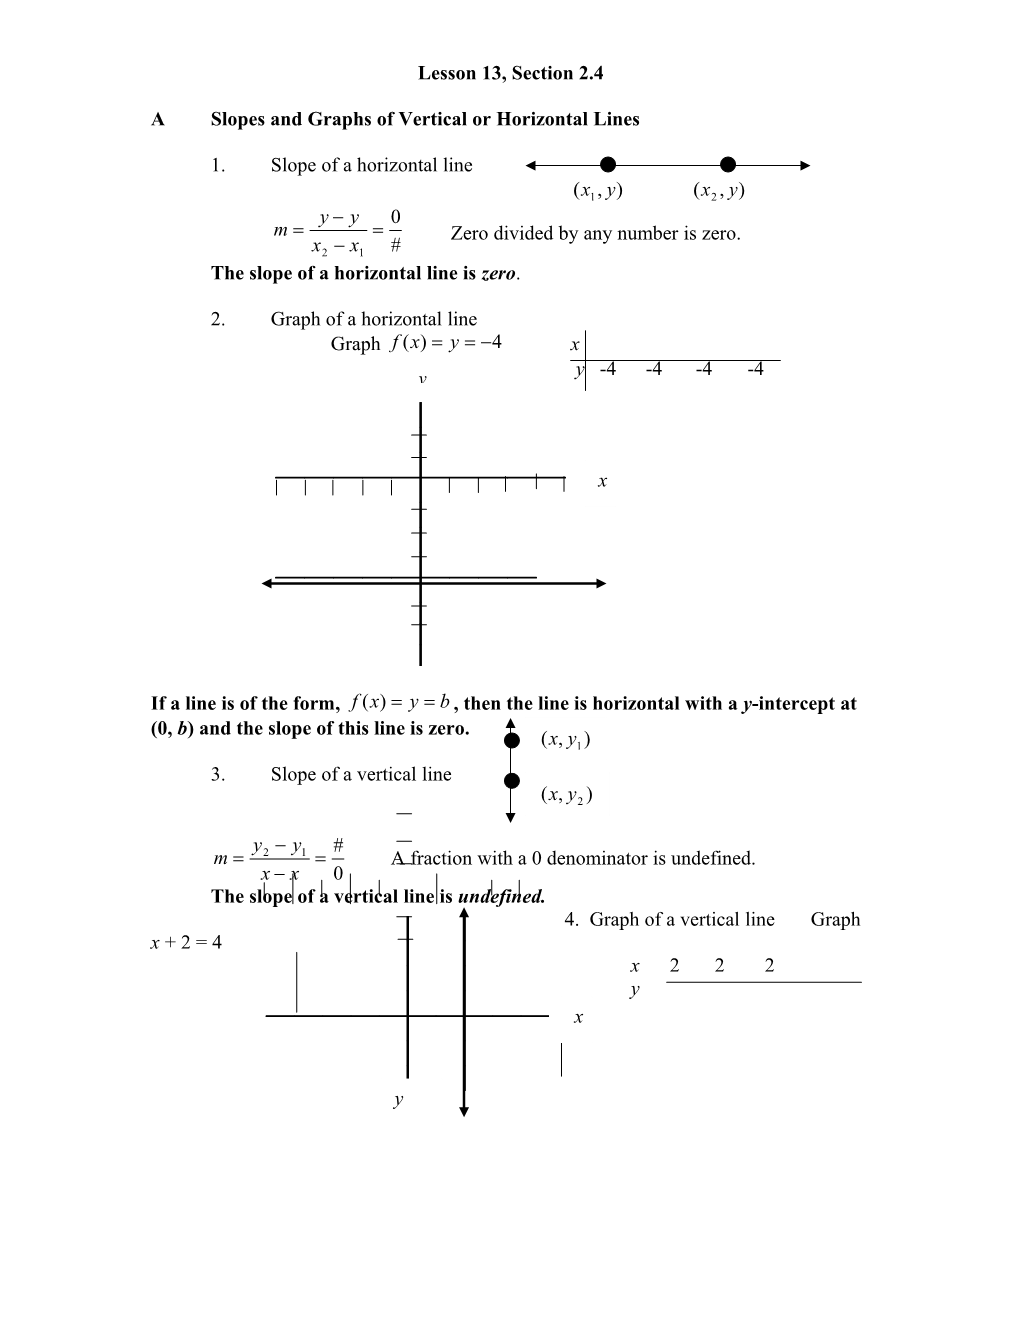 A Slopes and Graphs of Vertical Or Horizontal Lines